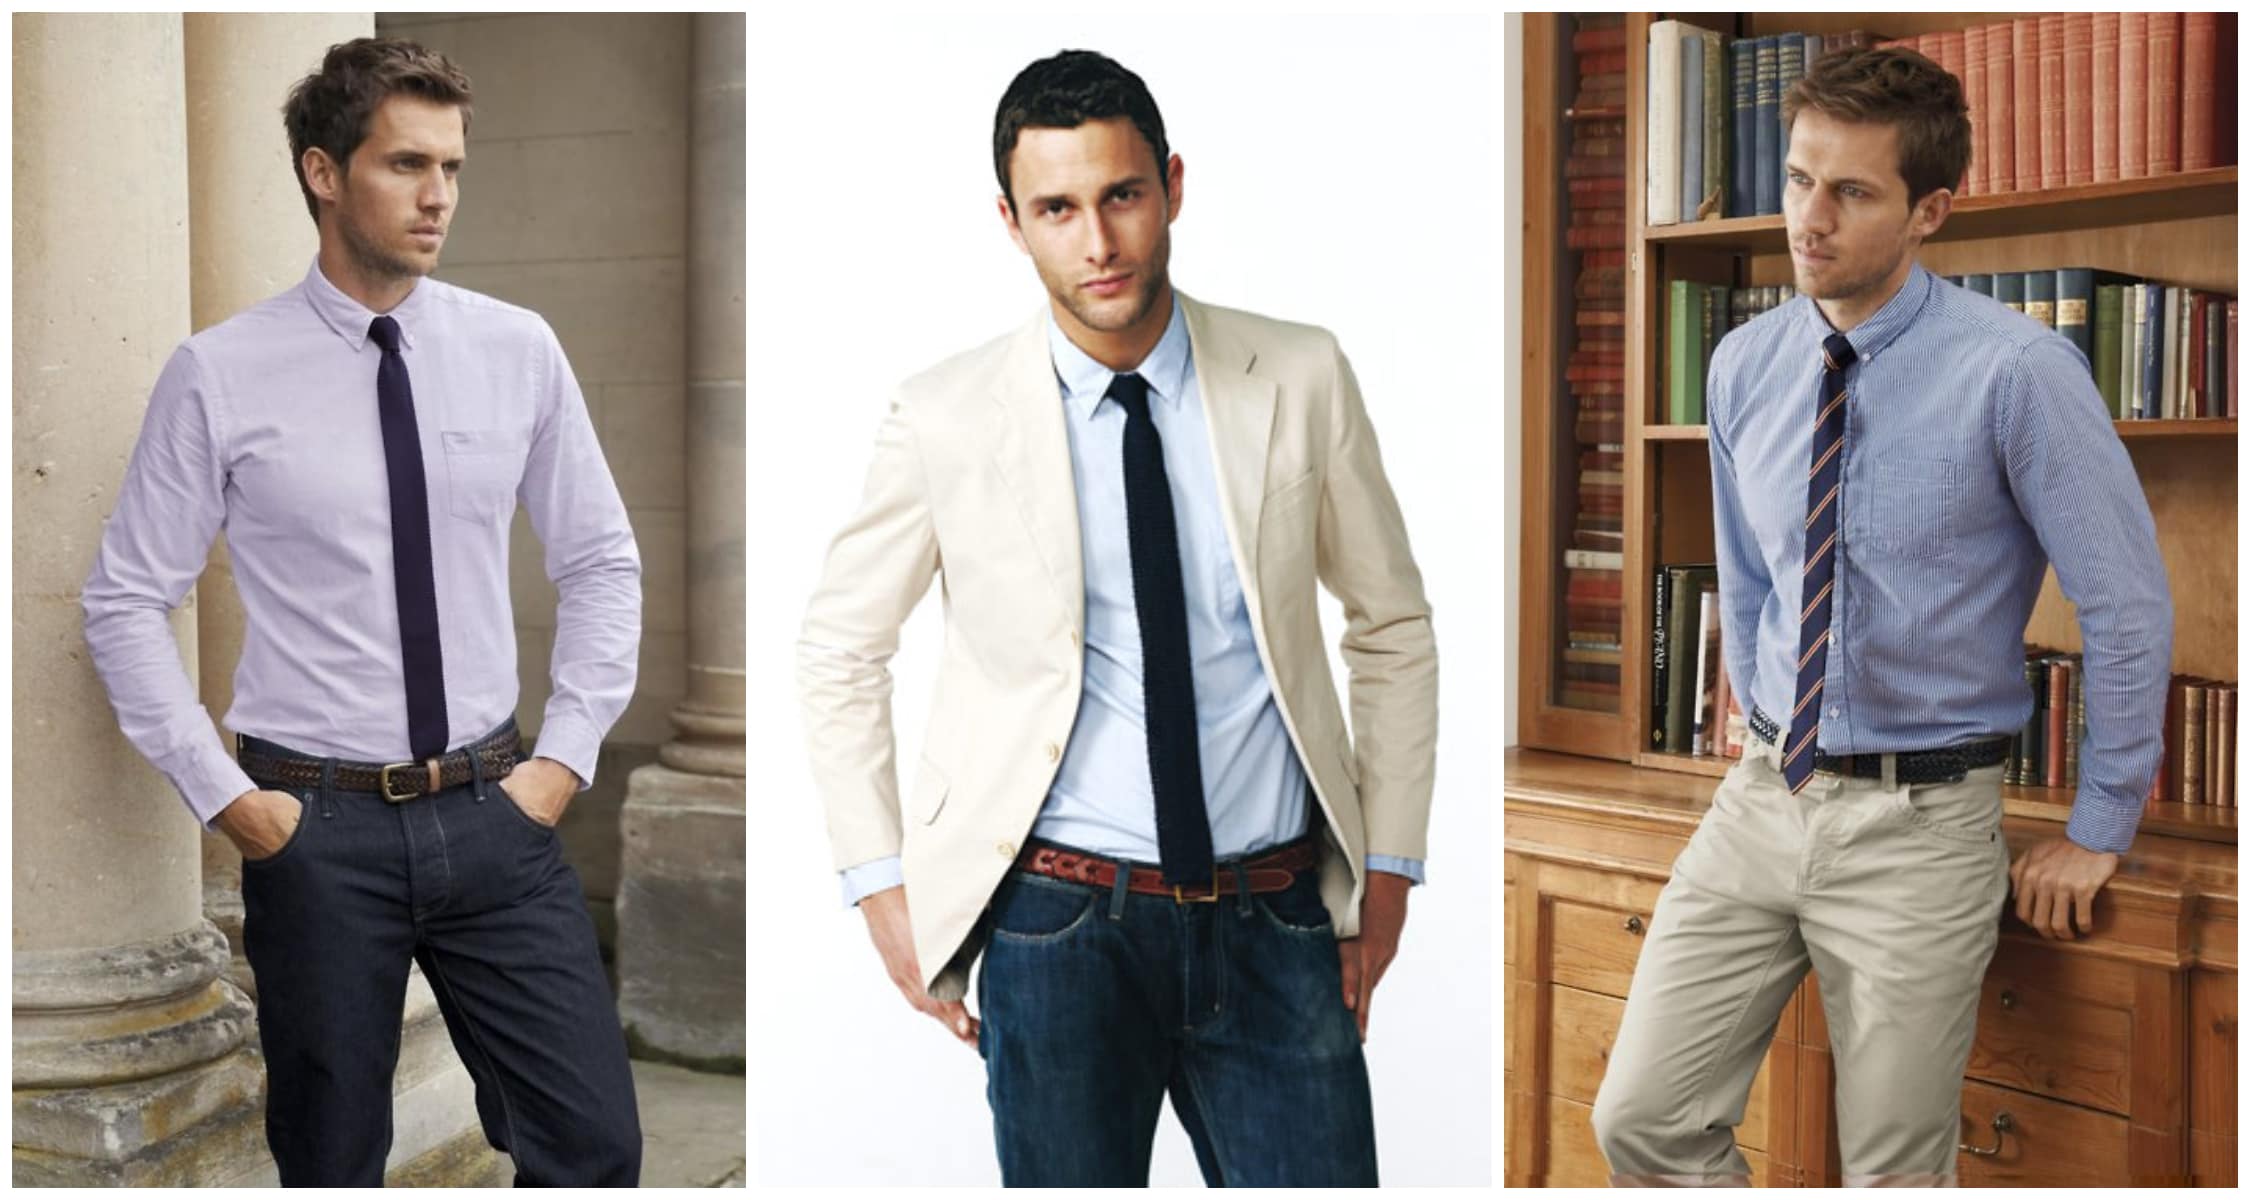 A Stylish Man's Guide to Business Casual